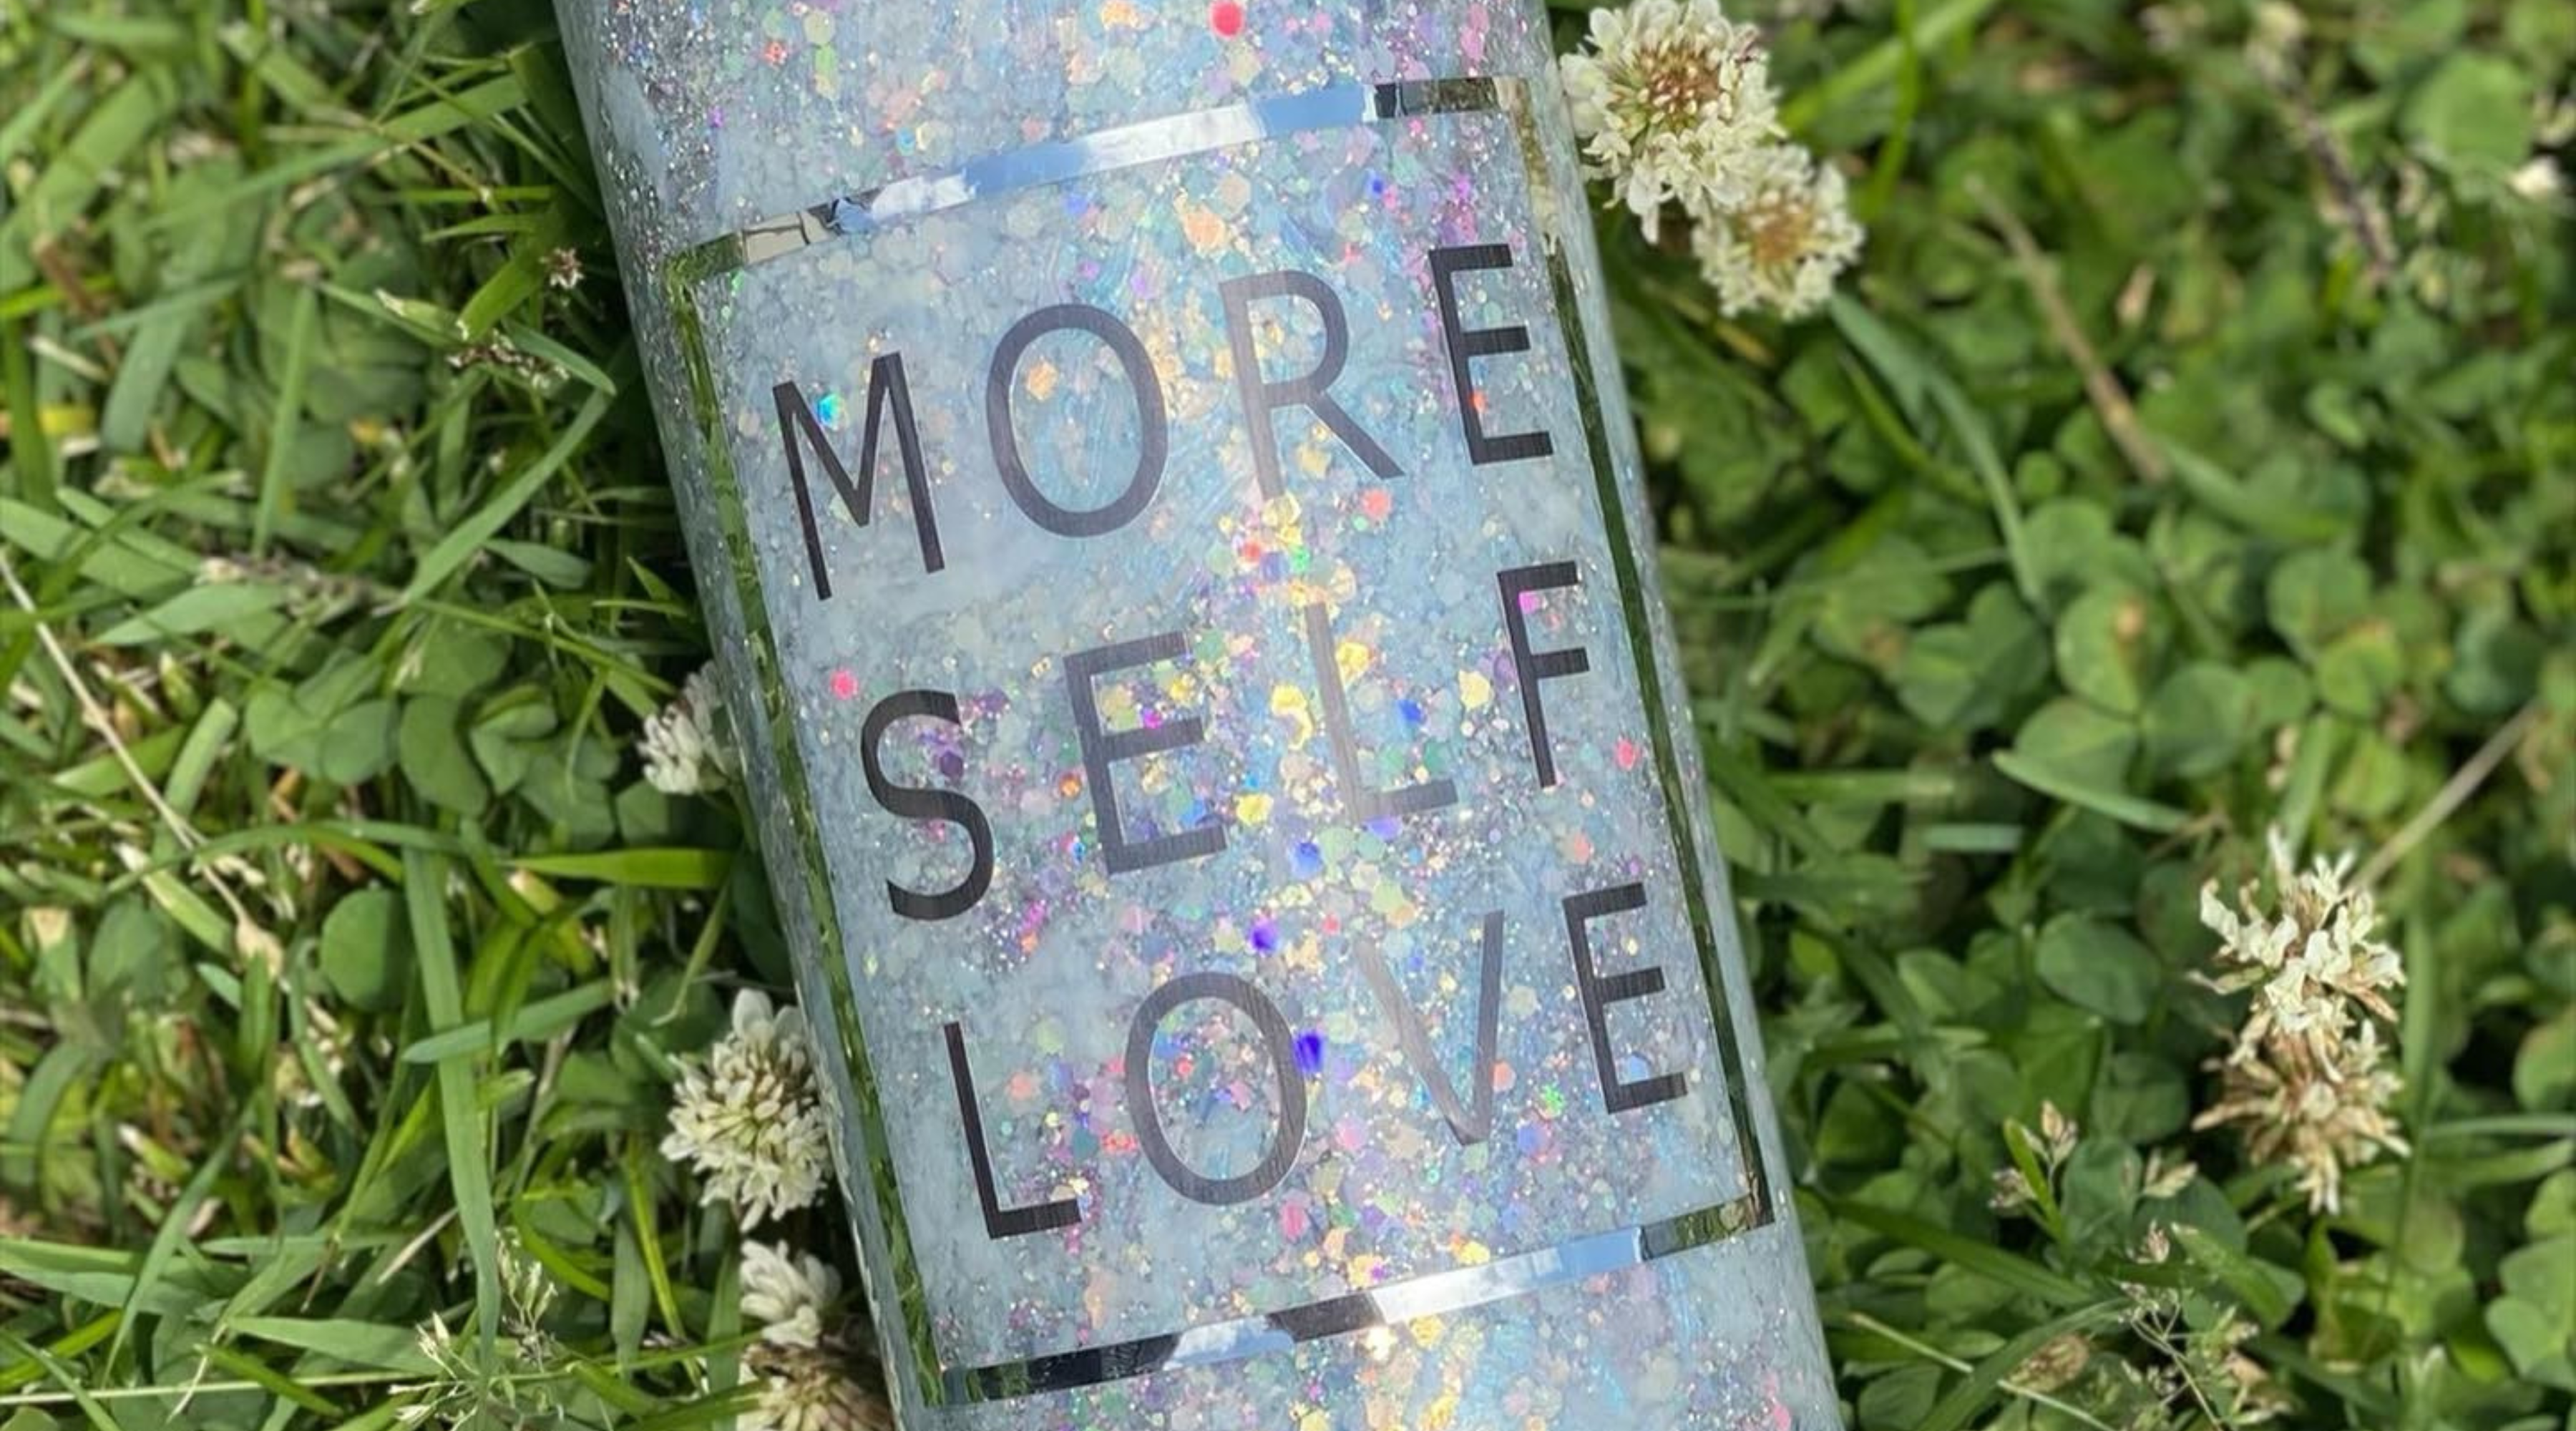 silver glitter tumbler with a "more self love" decal sitting in the grass with dandelions showing how to make tumblers